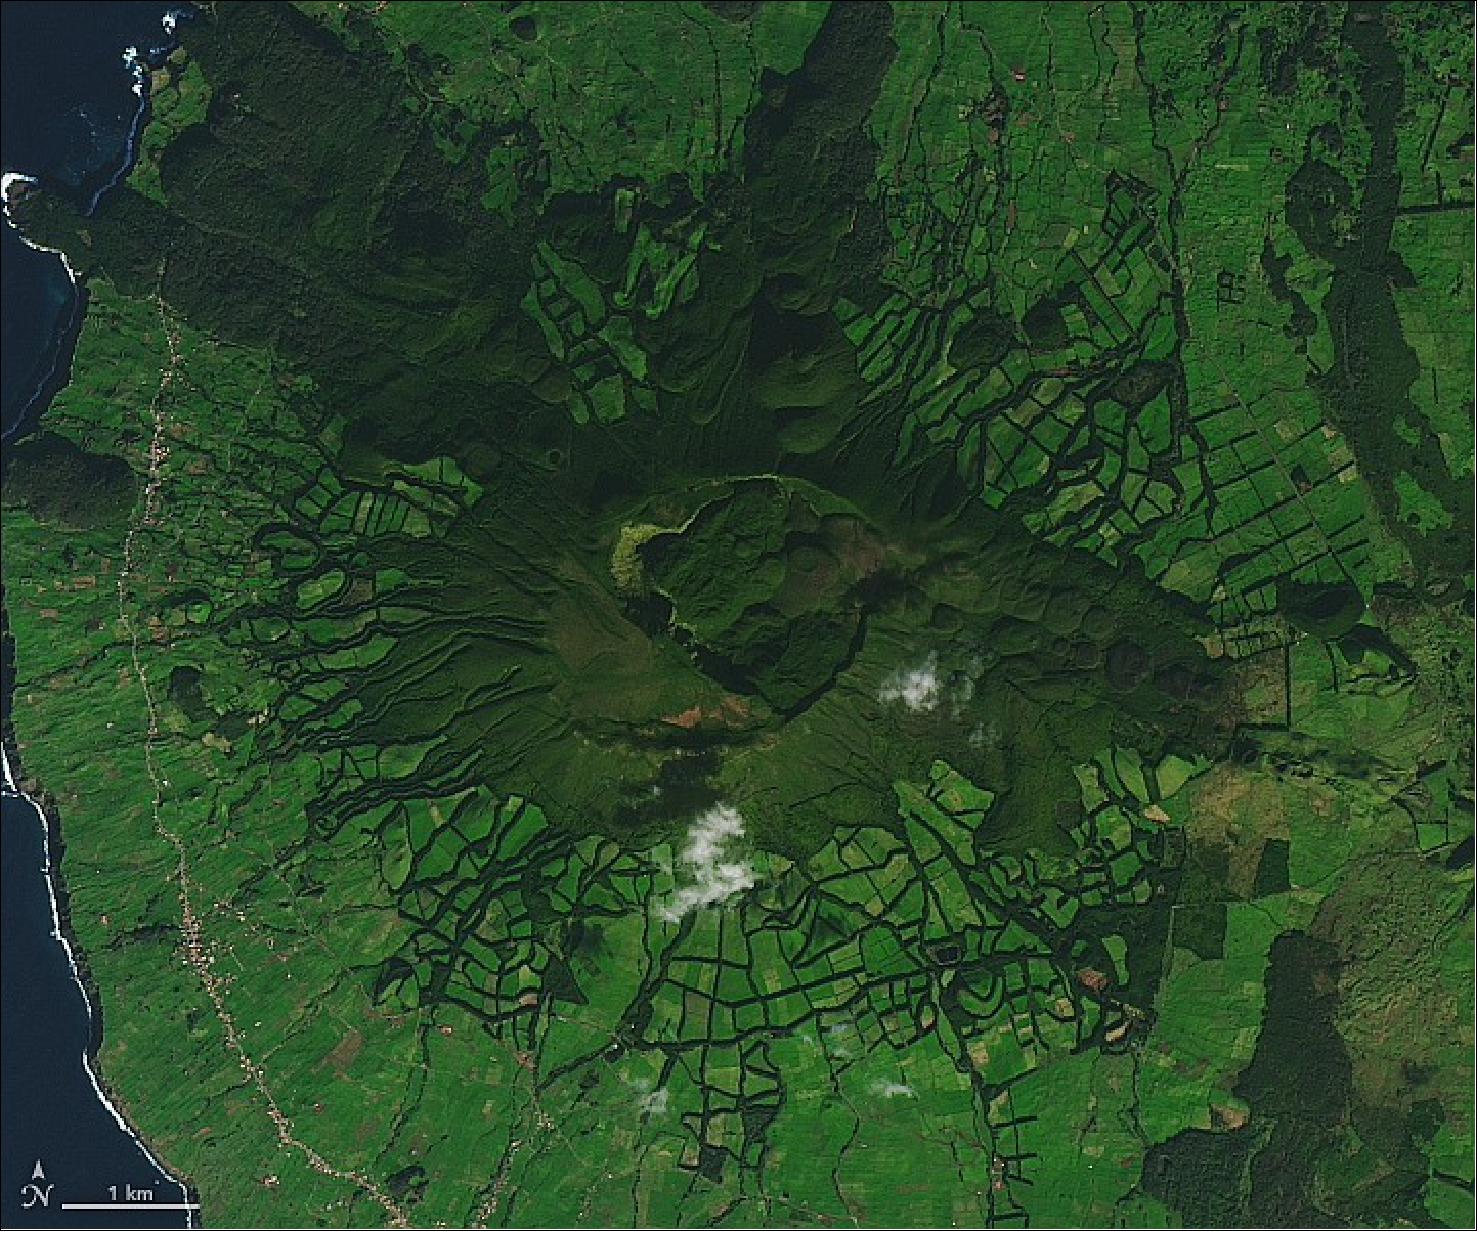 Figure 28: This detailed view shows the volcanic features of Serra de Santa Bárbara. The peak includes a double caldera, which formed from summit collapses 25,000 and 15,000 years ago. Also visible are small lava domes that formed on the eastern flank in 1761 during the last volcanic eruption to occur on land on Terceira (image credit: NASA Earth Observatory)